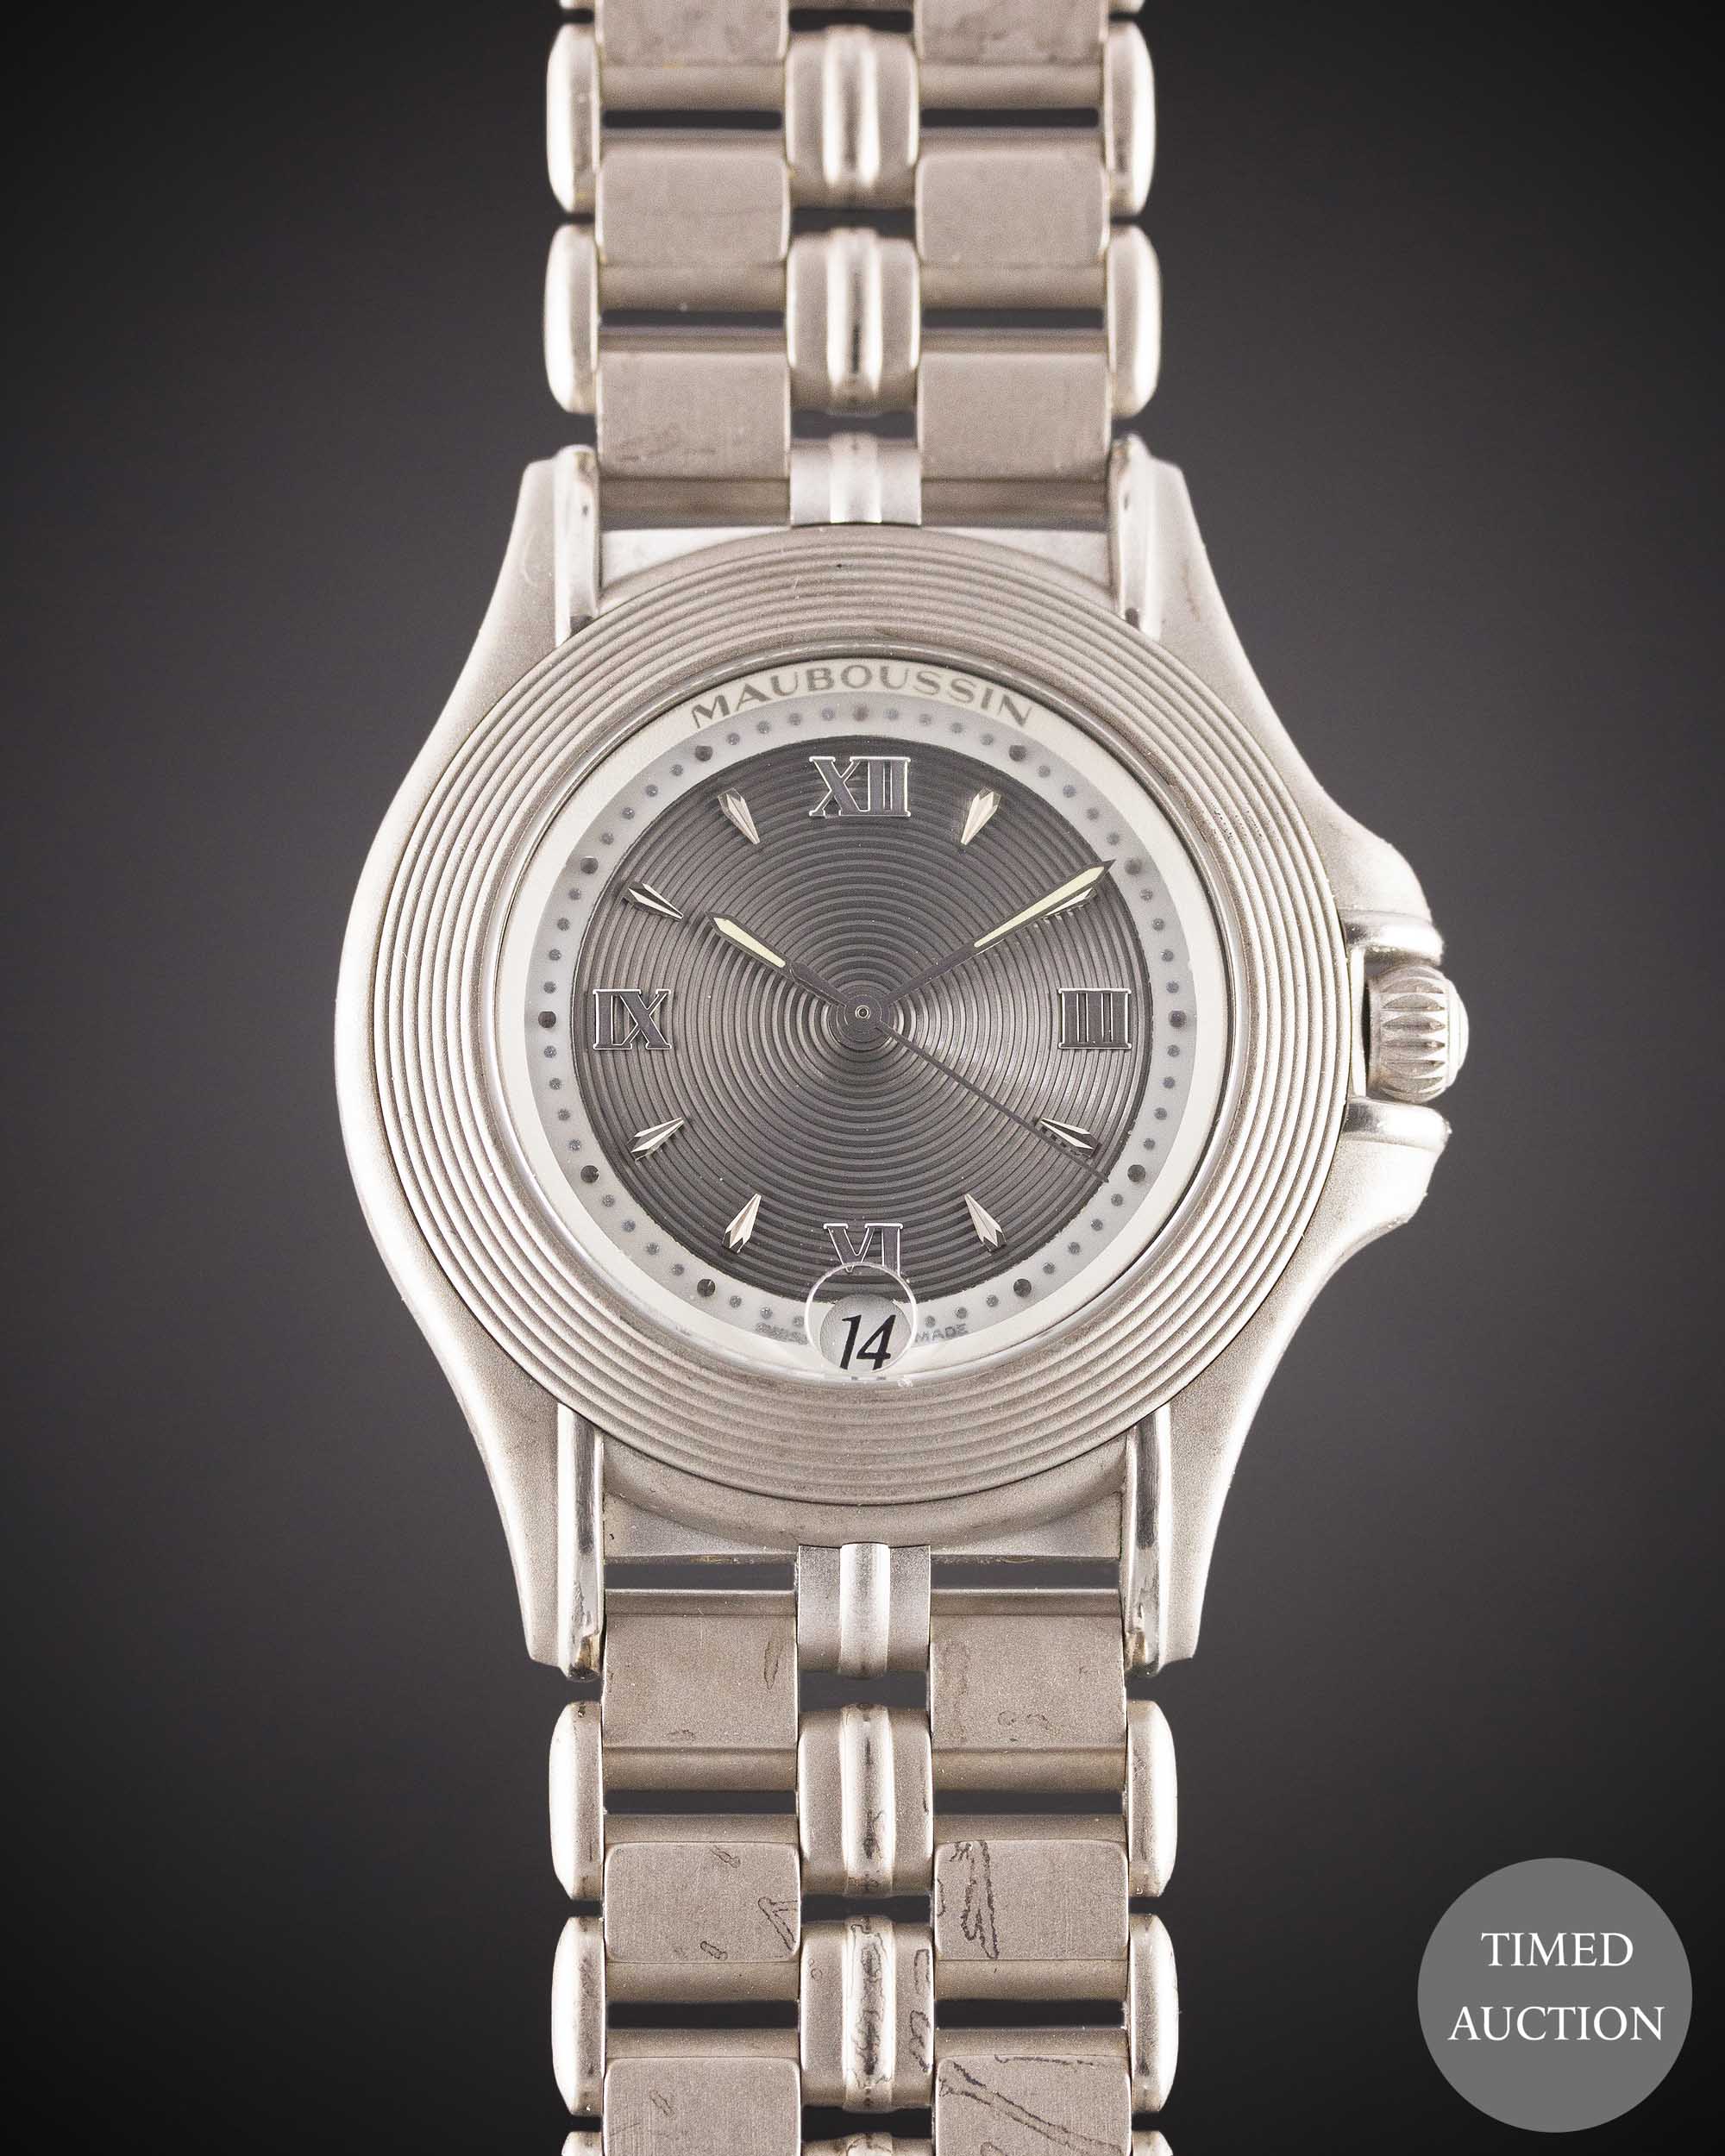 A GENTLEMAN'S SIZE 18K SOLID WHITE GOLD MAUBOUSSIN AUTOMATIC BRACELET WATCH CIRCA 1990s, REF. R02368